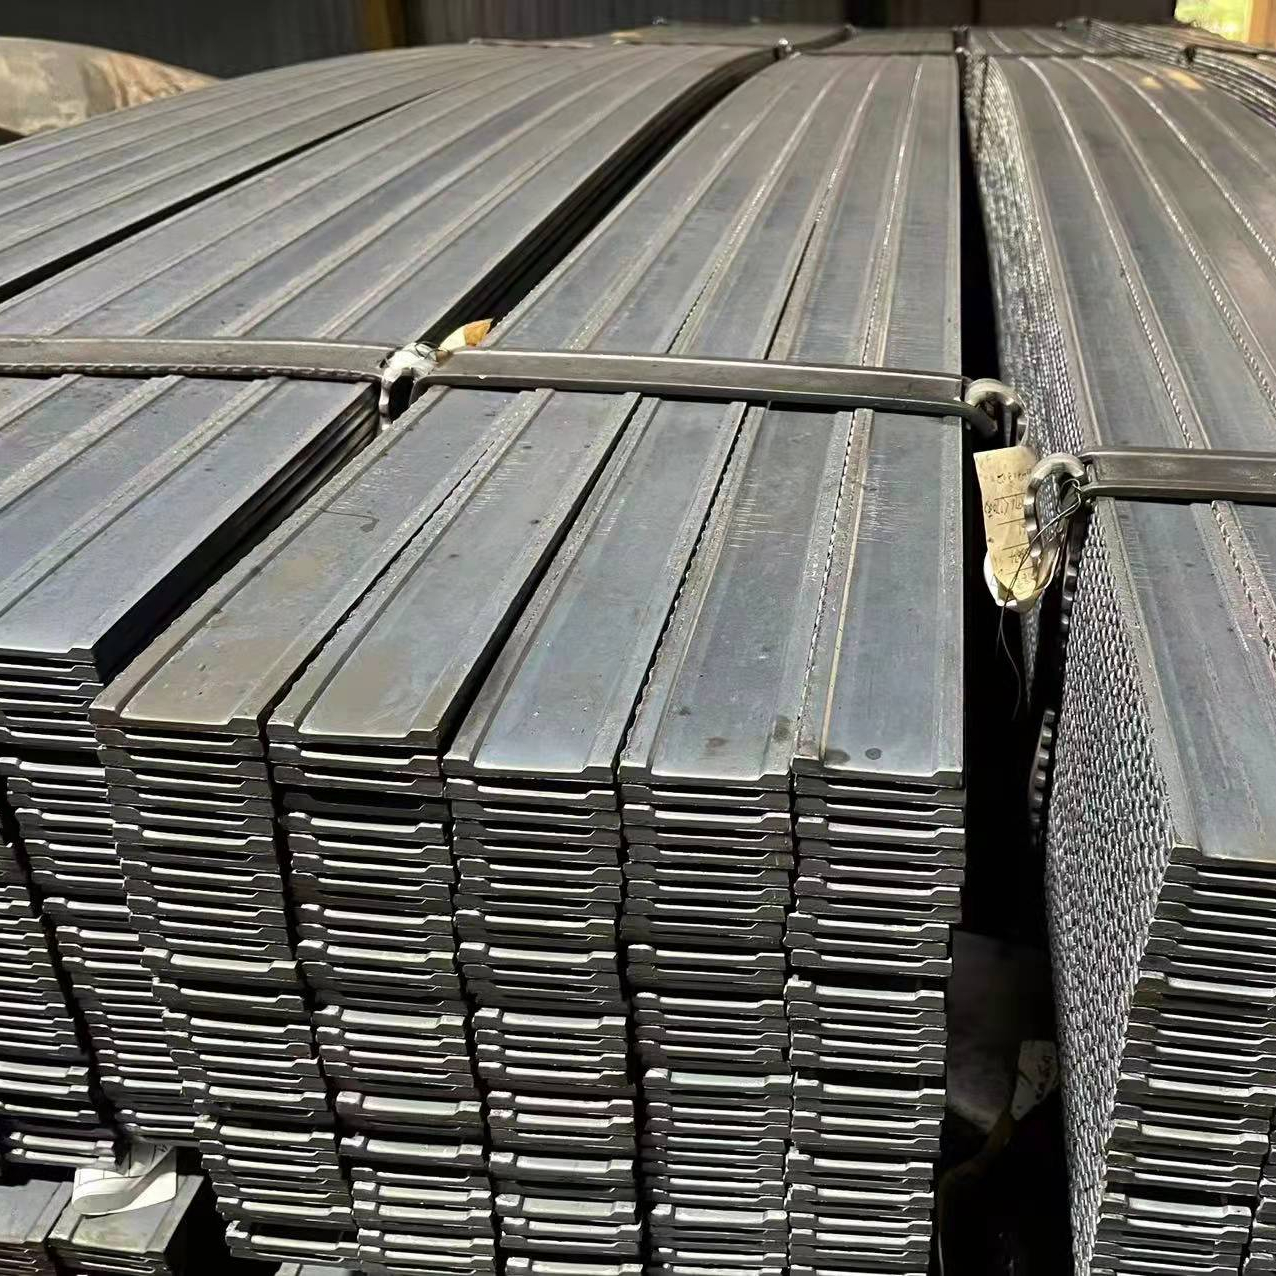 Factory Fine Price Hot Dipped Galvanized Ck45 Carbon Steel Flat Bar Prime Quality 